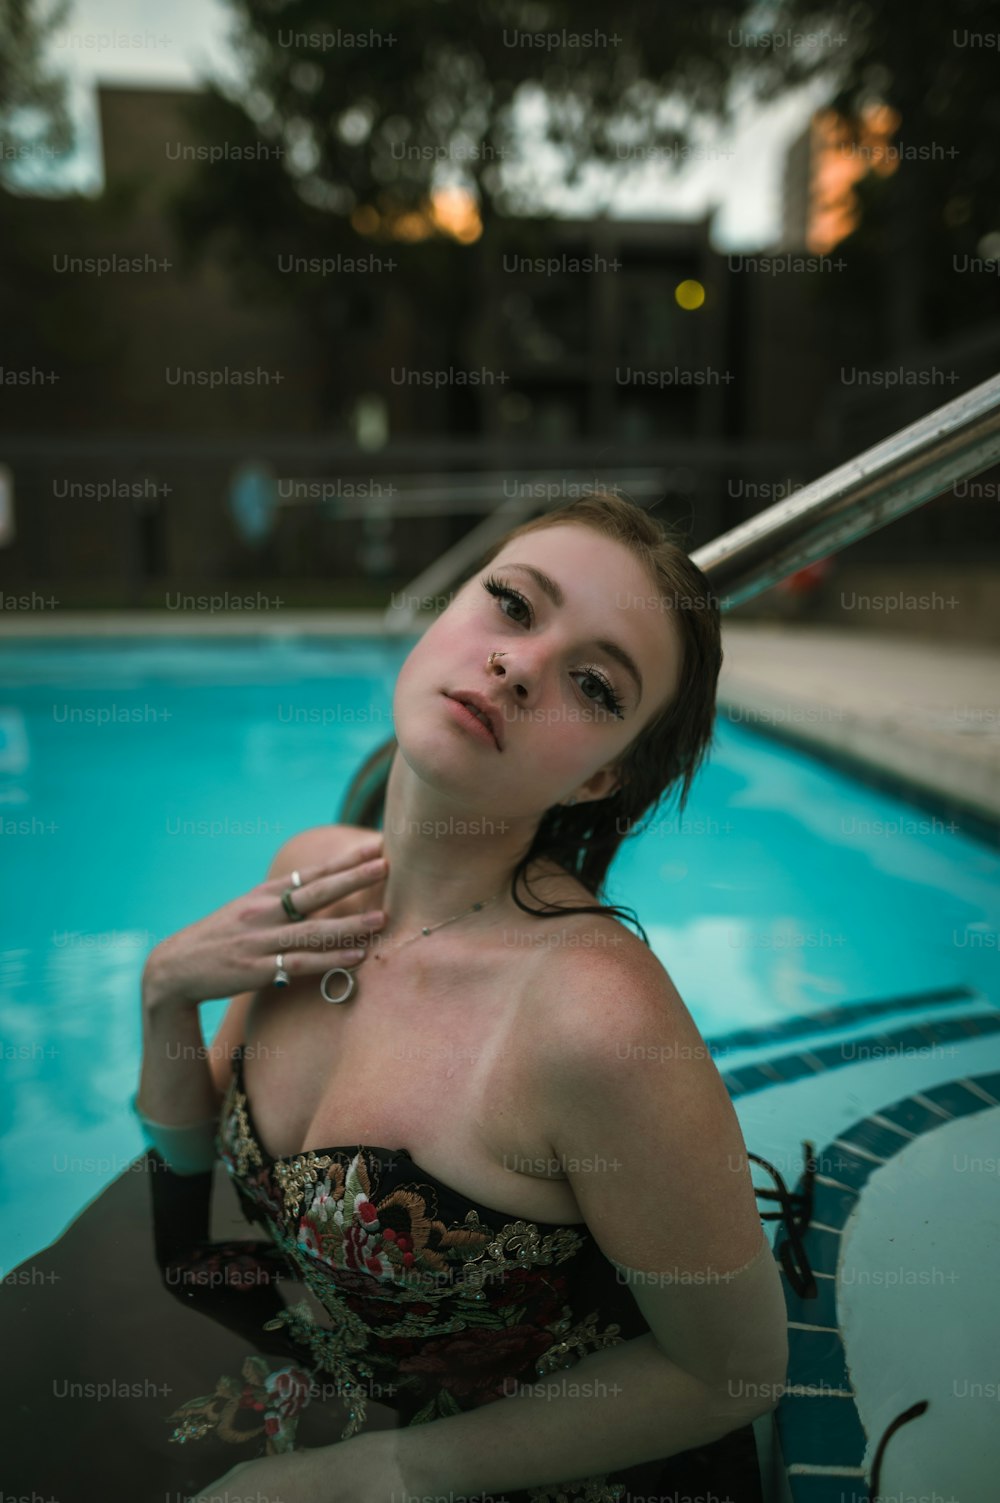 a woman sitting in a pool with a cigarette in her hand